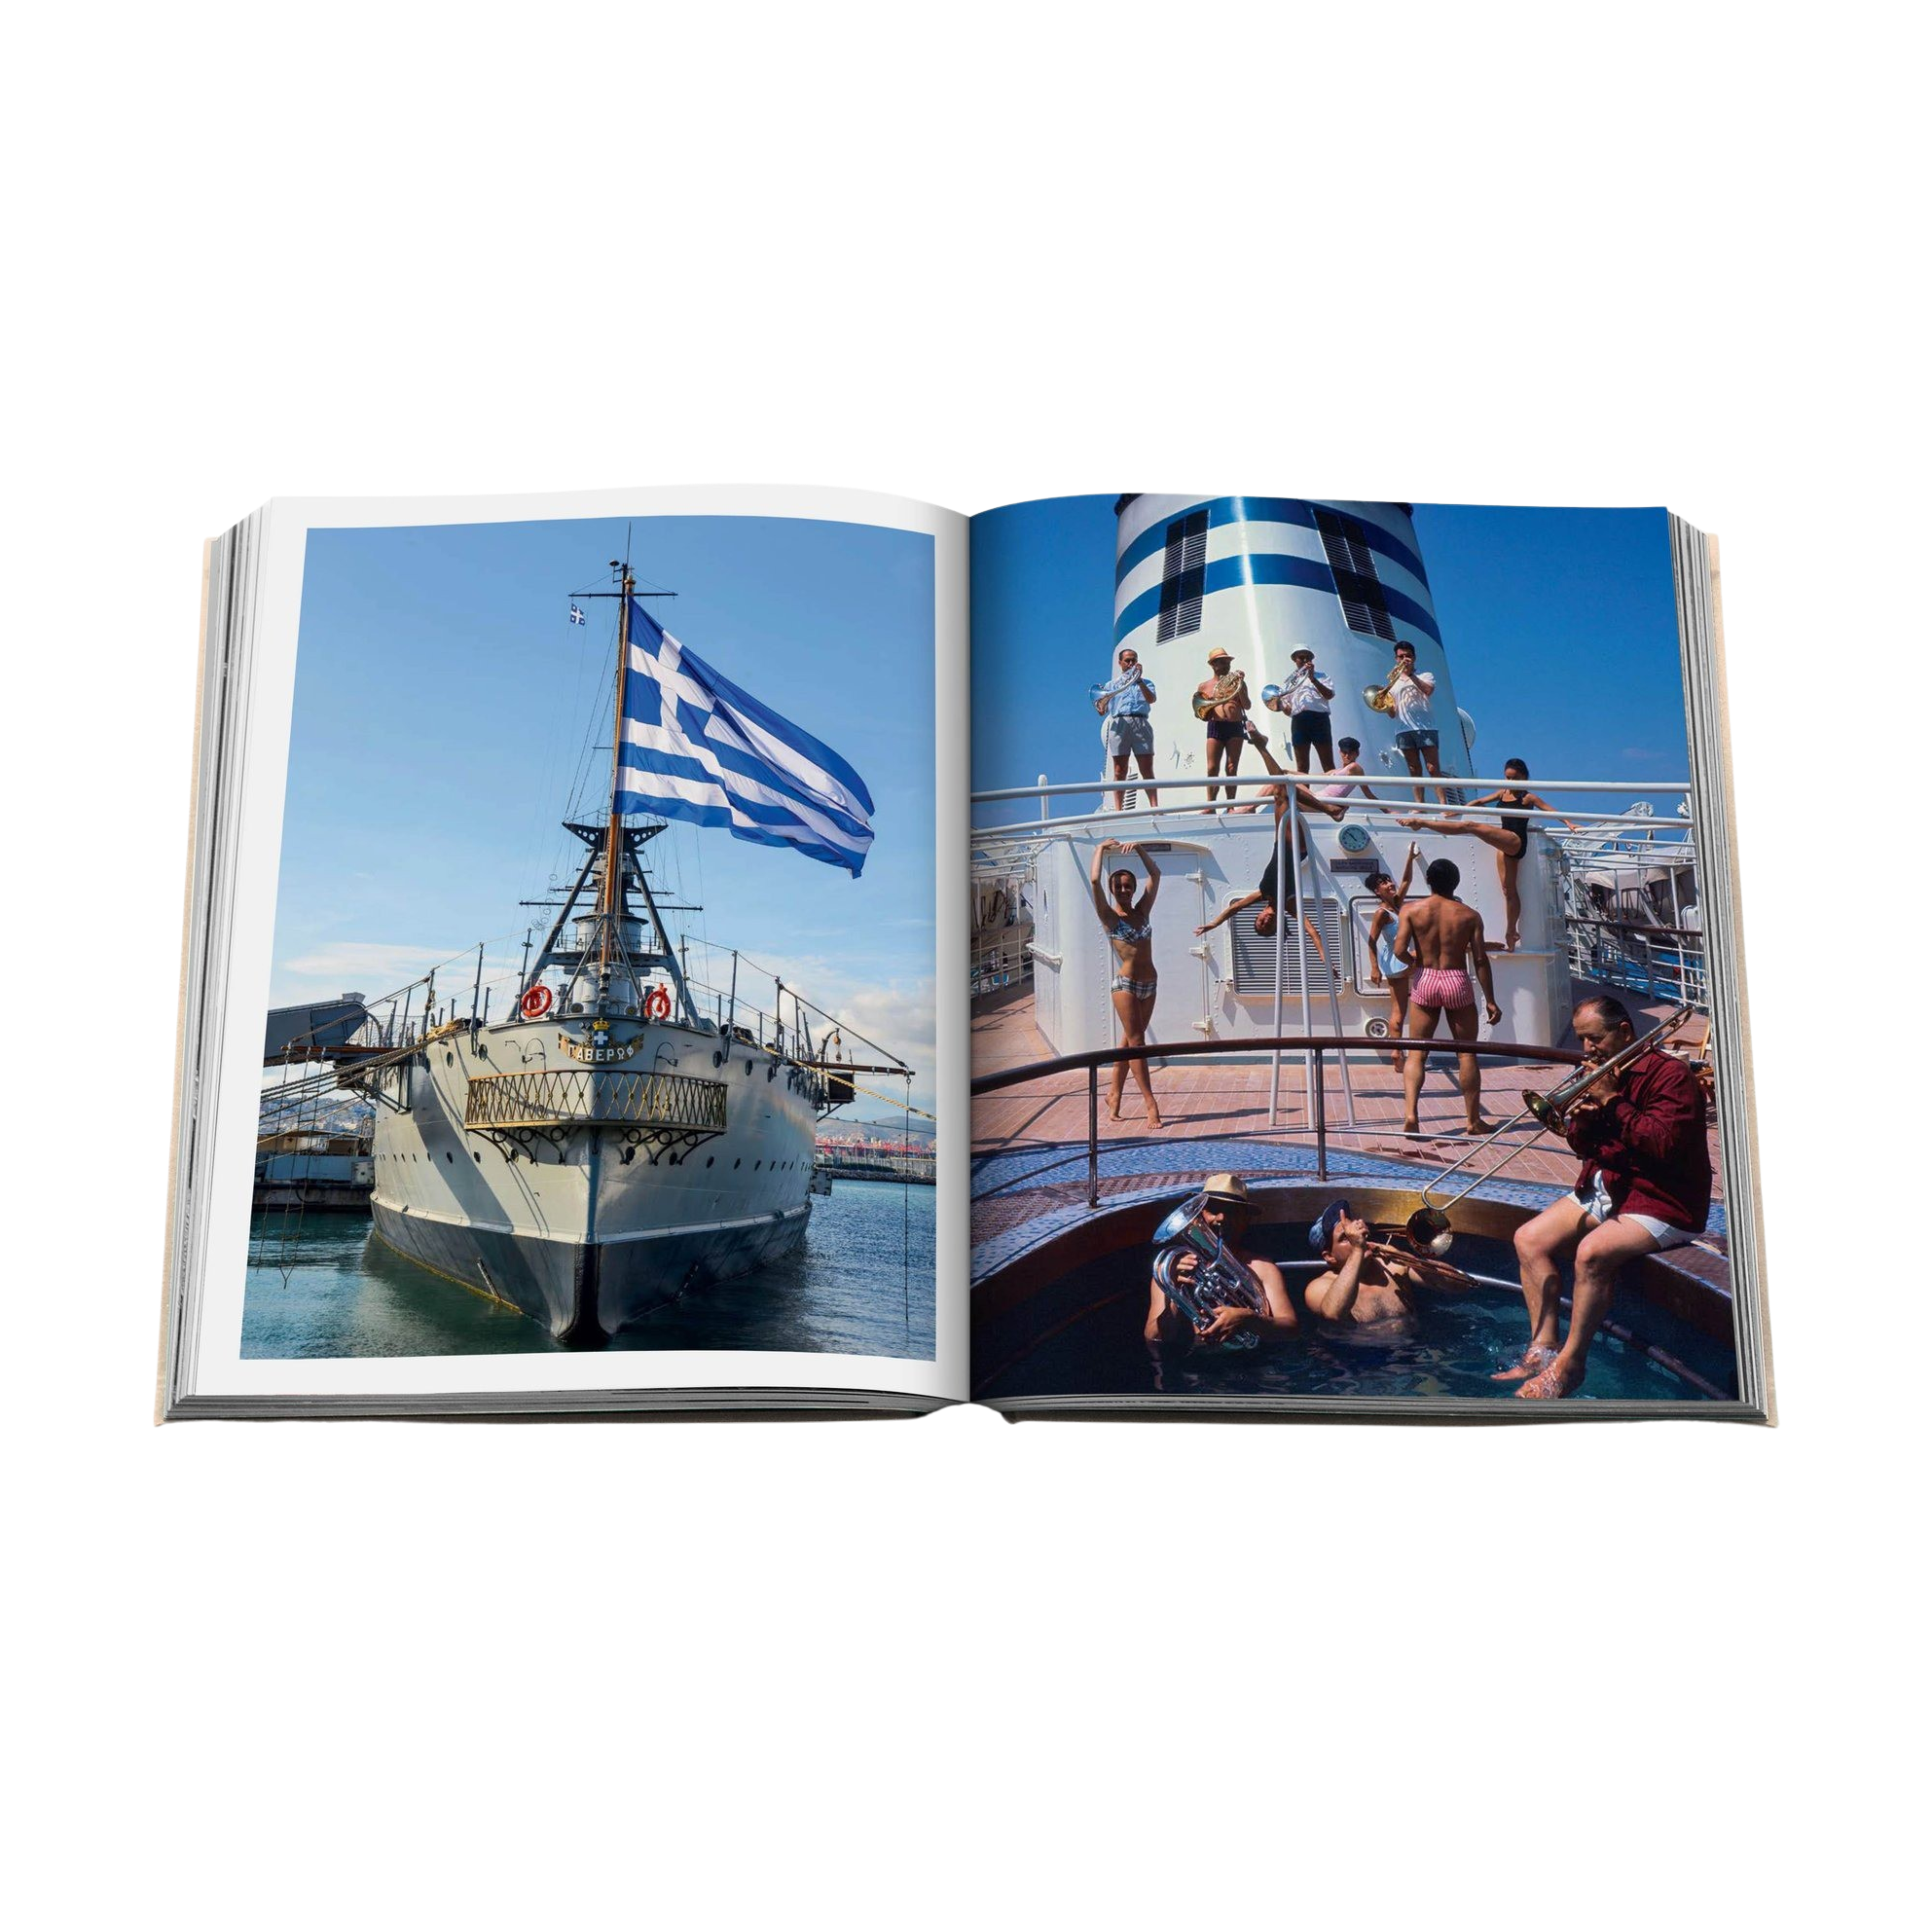 83144 Assouline Athens Riviera Coffee table book